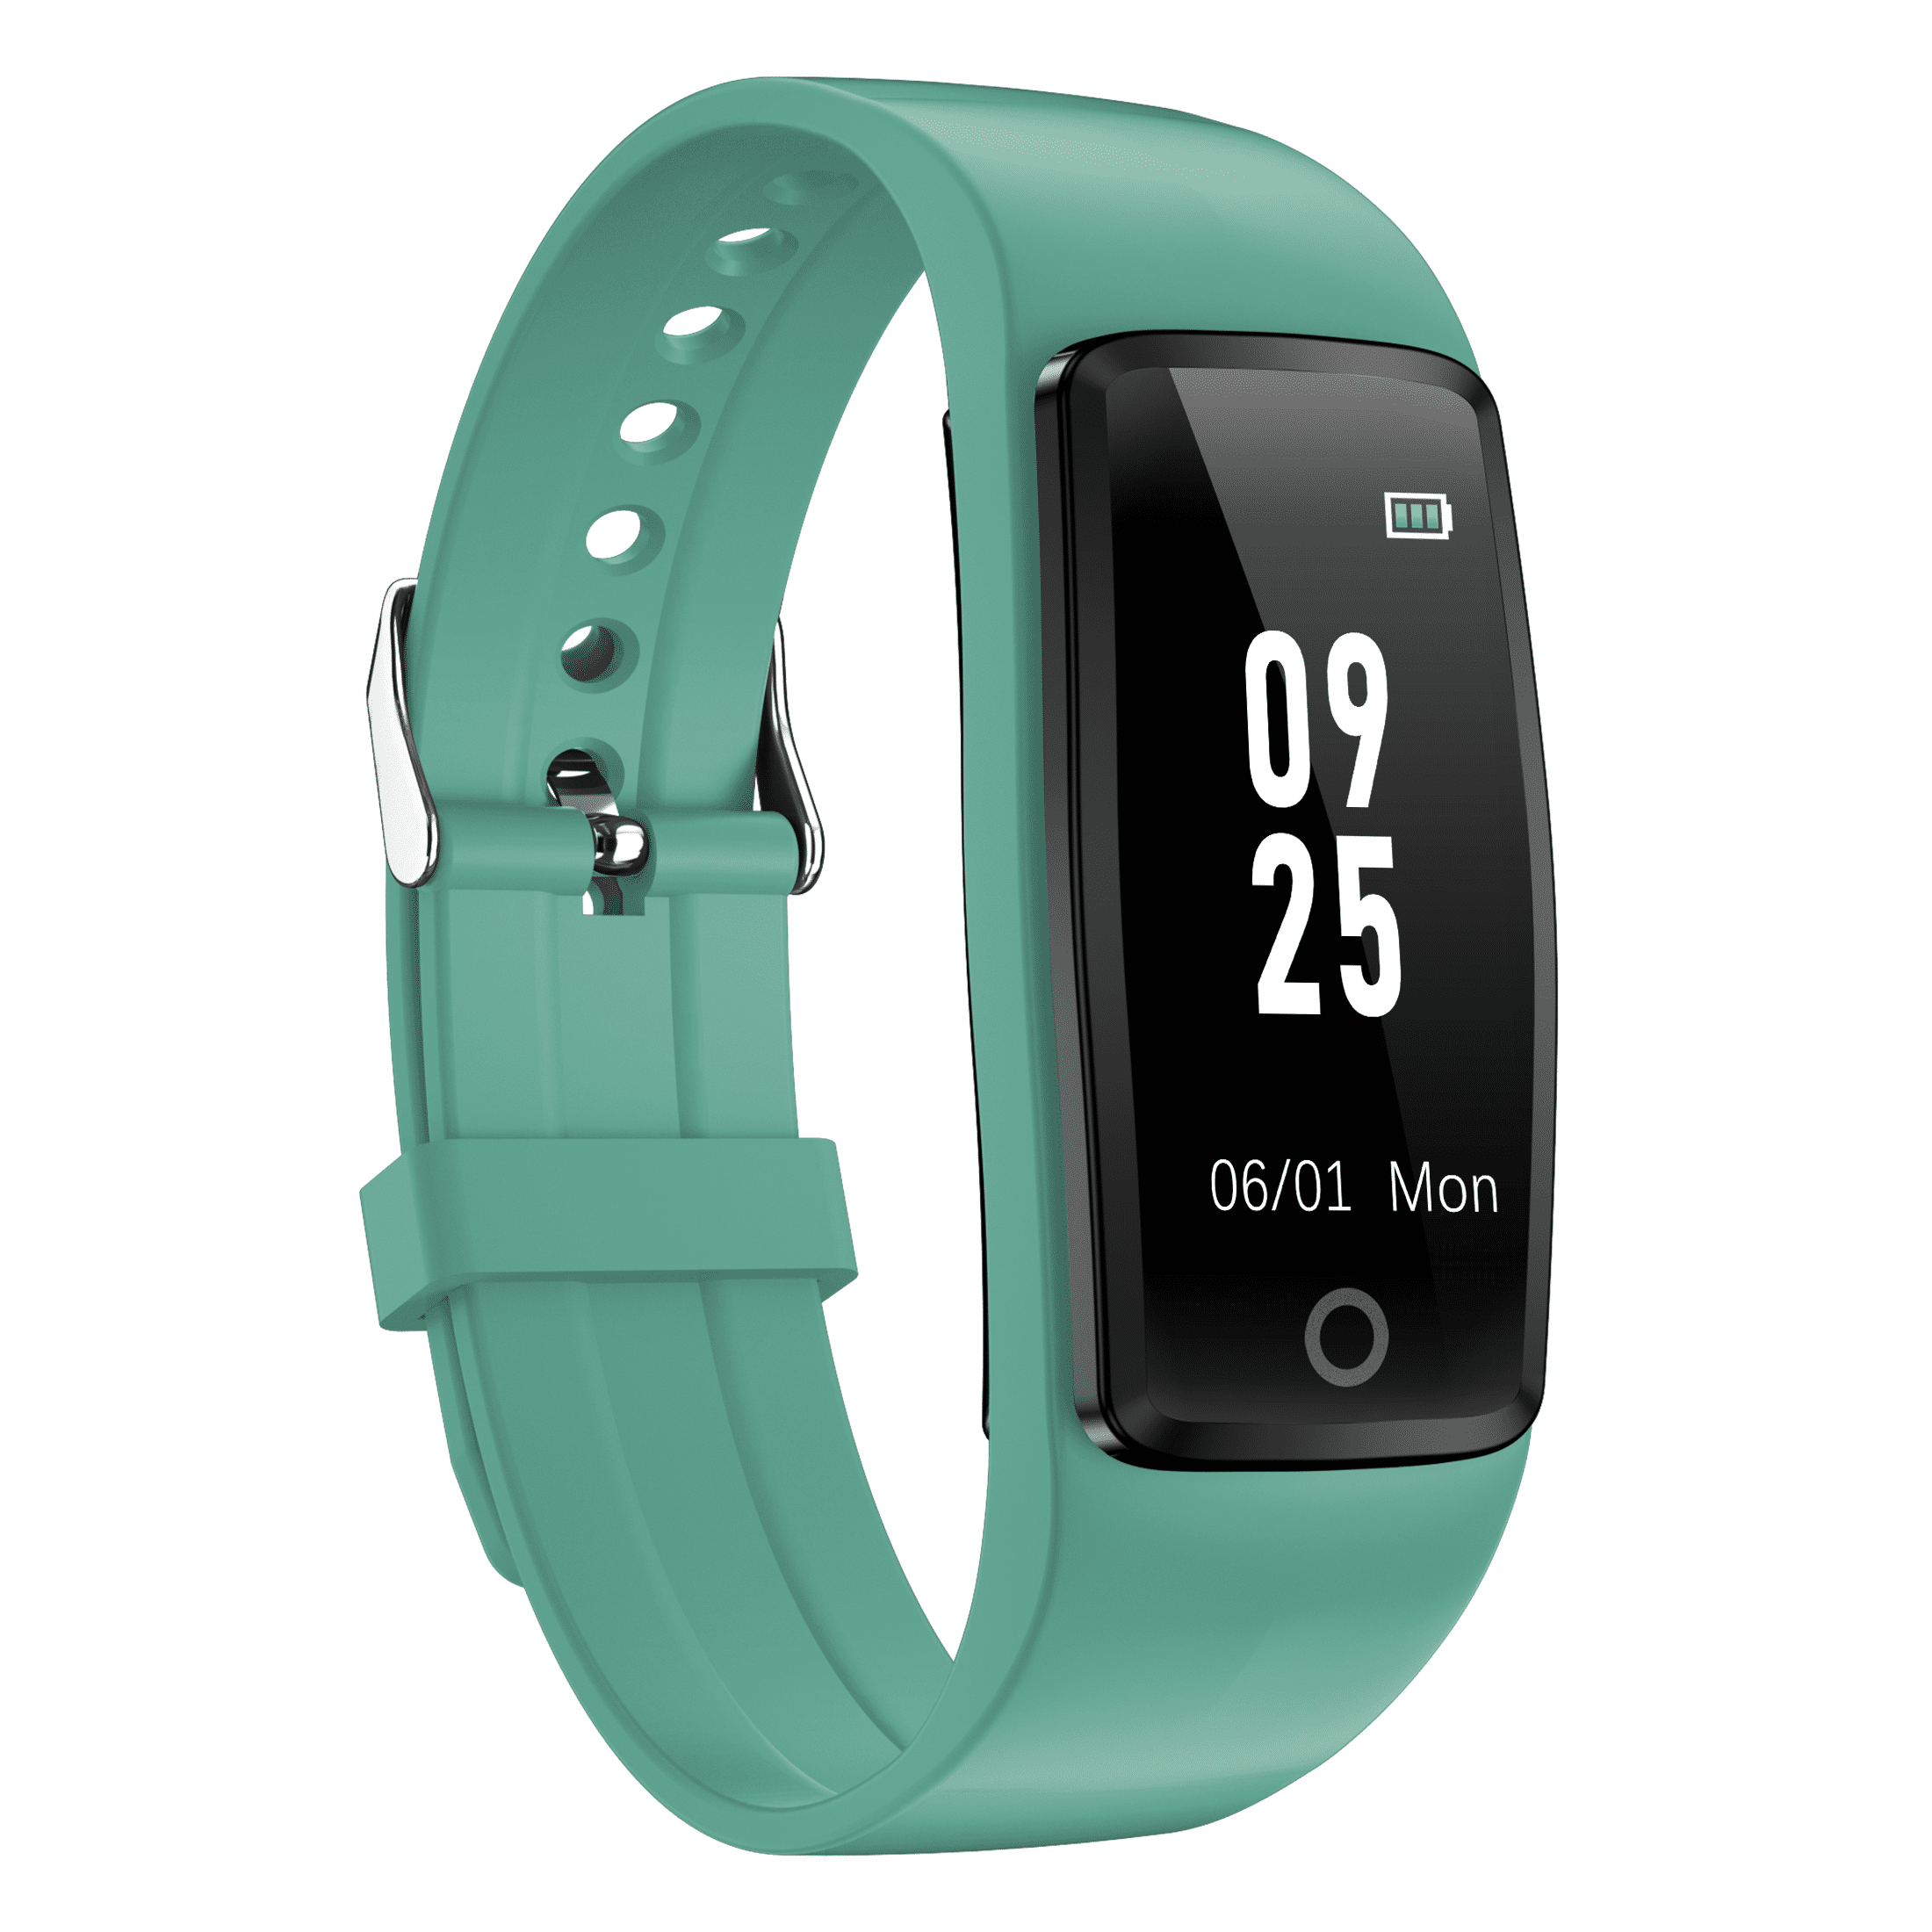 Willful Kids Fitness Watch,Fitness Tracker with Heart Rate Monitor Step Counter 